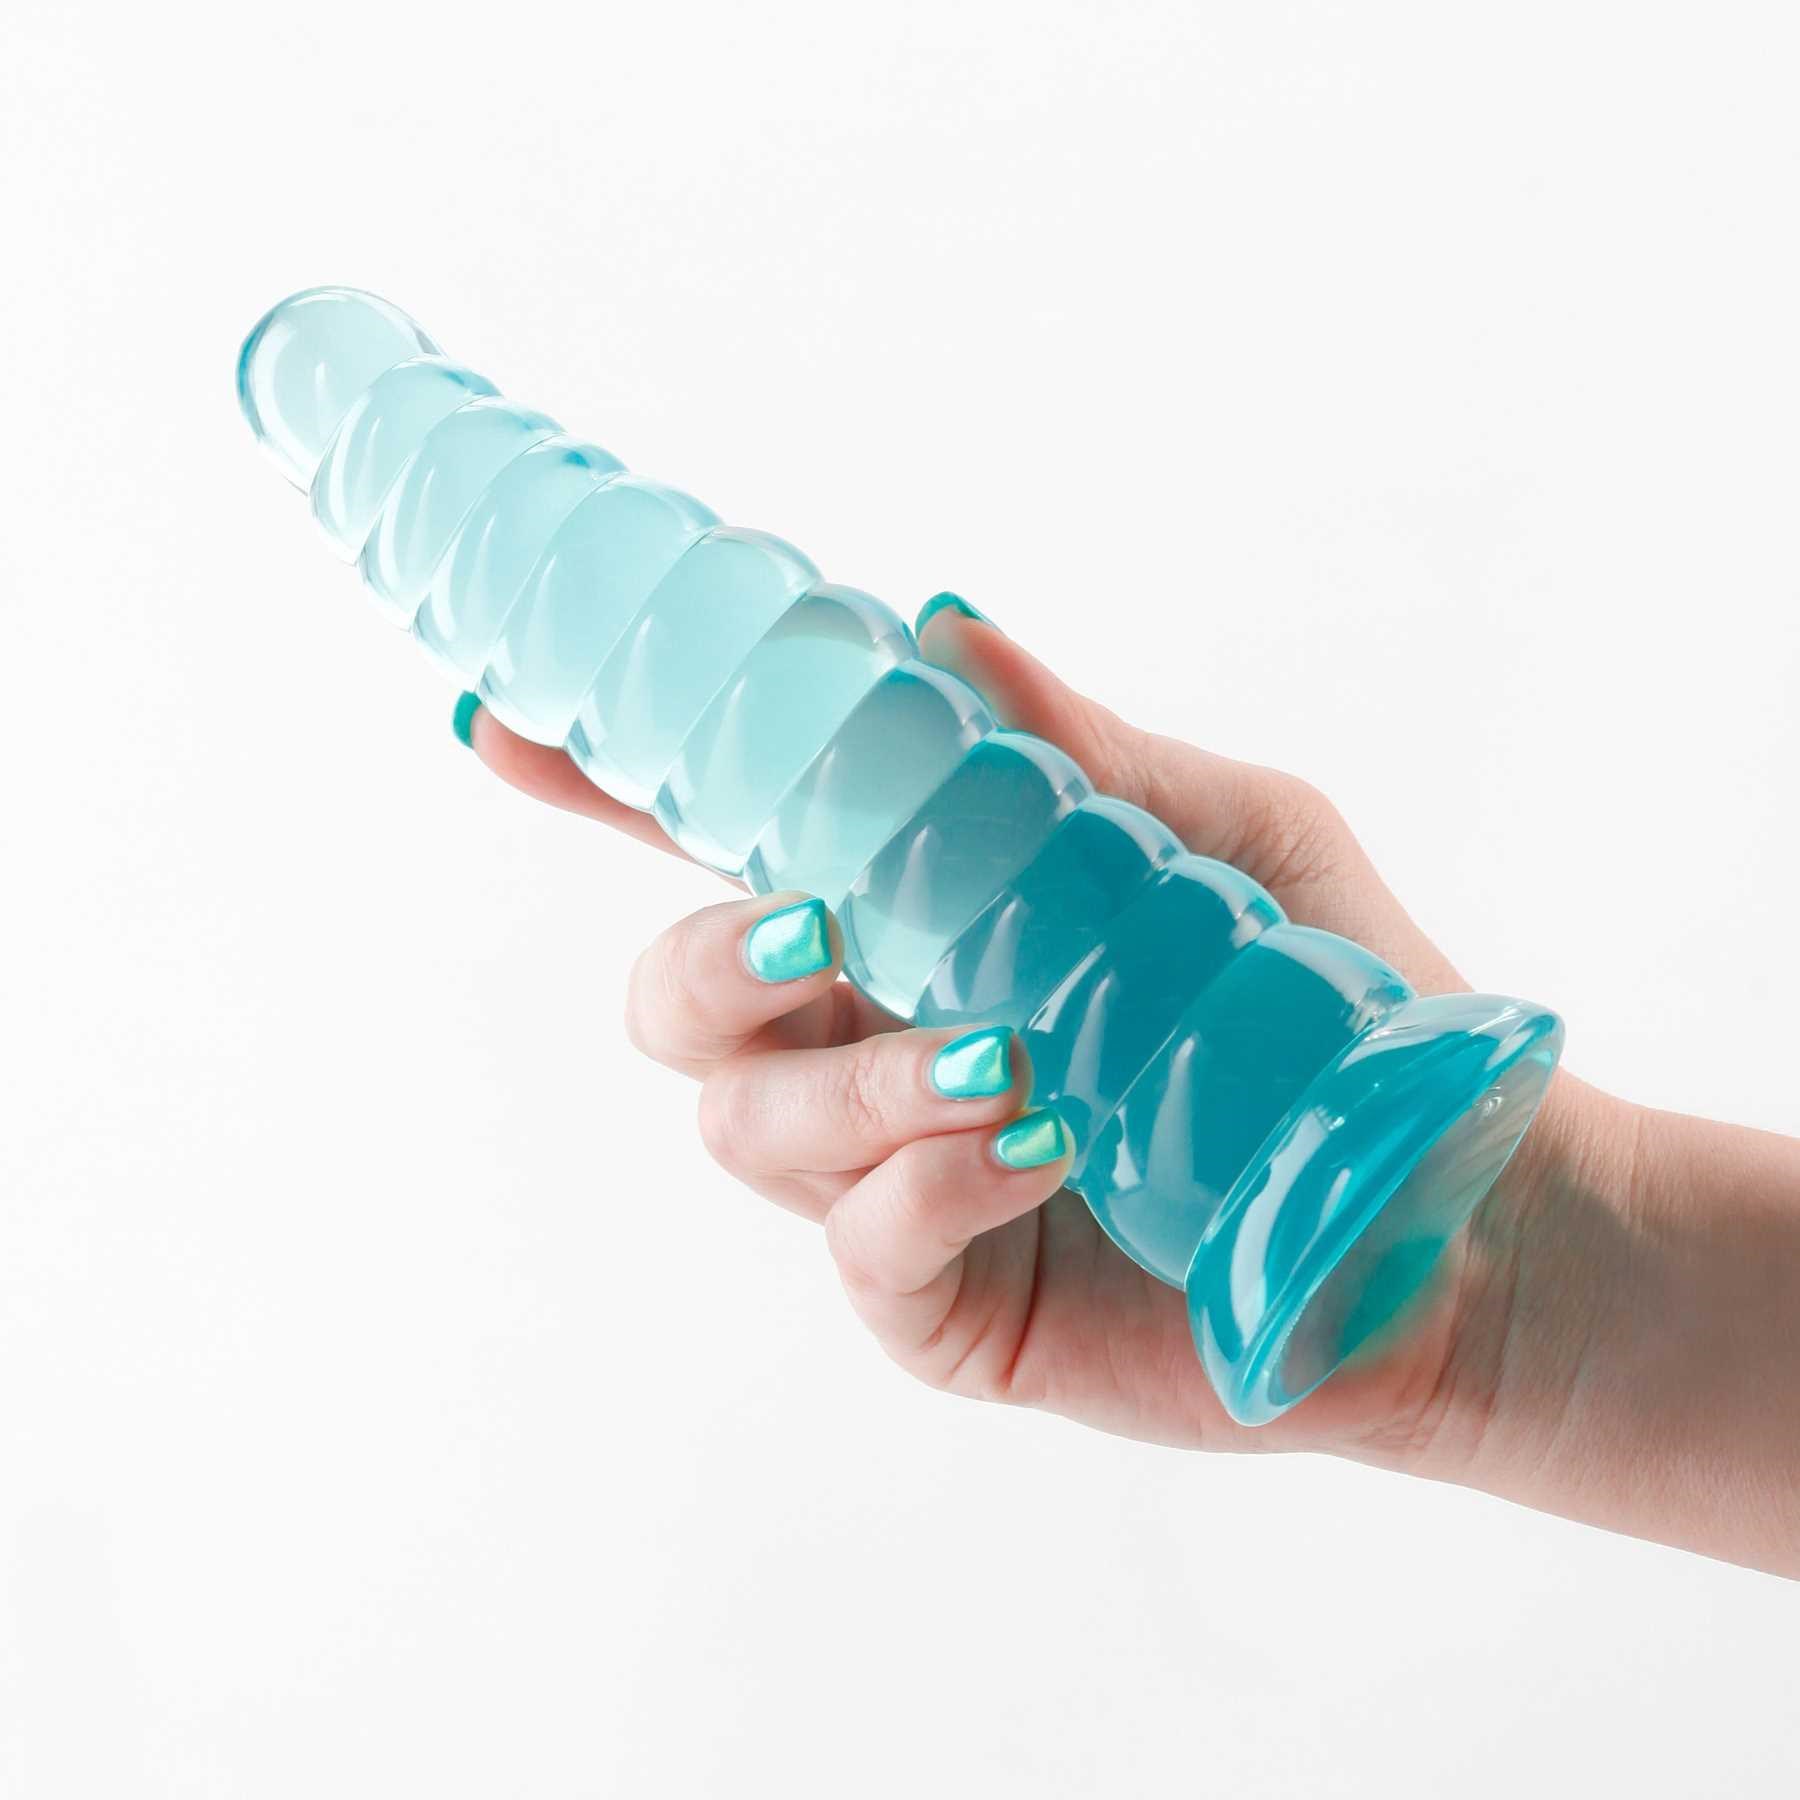 Fantasia Nymph Dildo hand holding teal